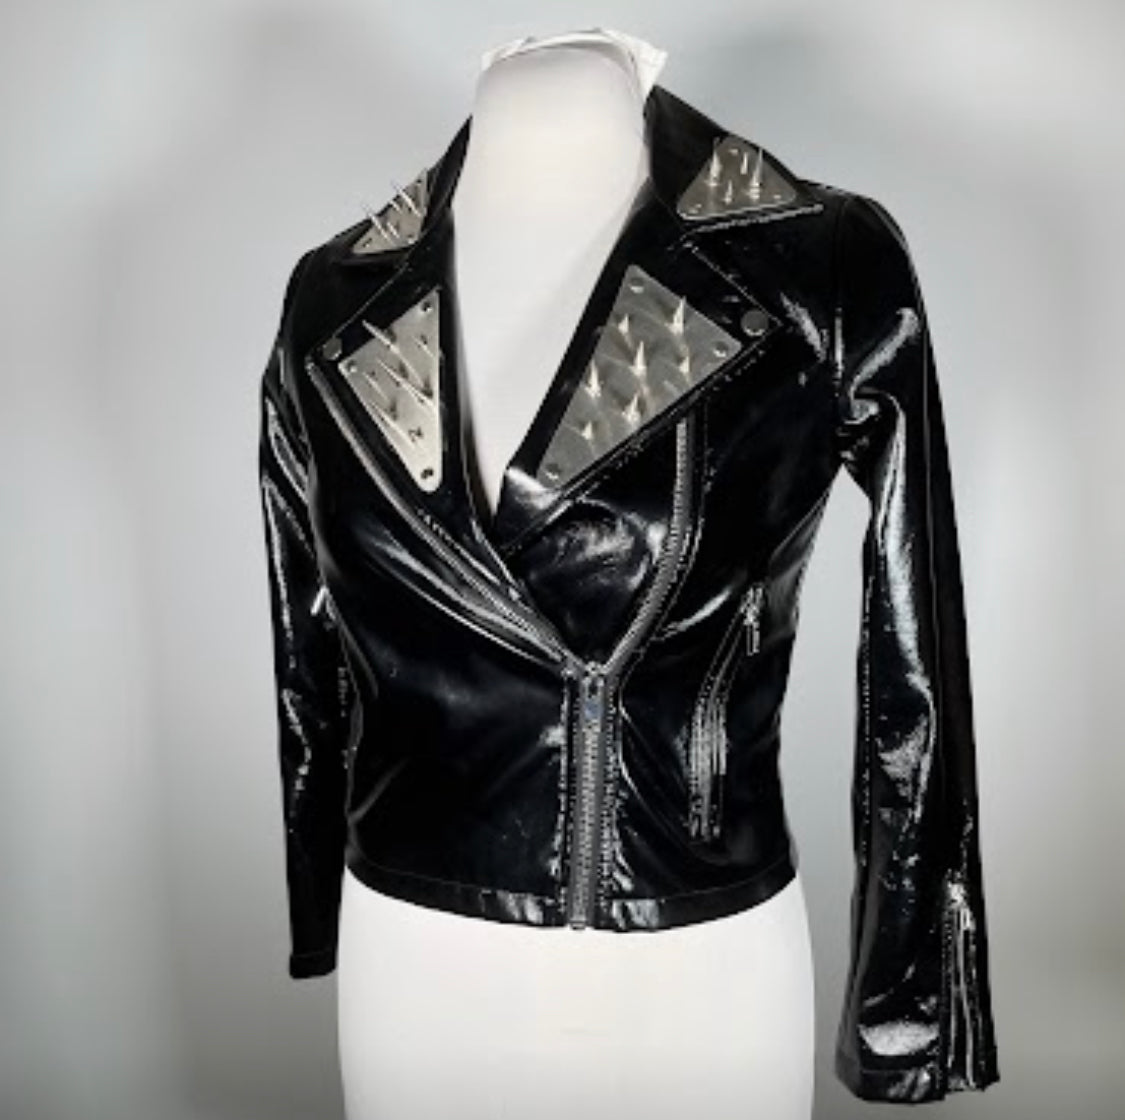 Vinyl PVC moto jacket with metal plating and spikes 